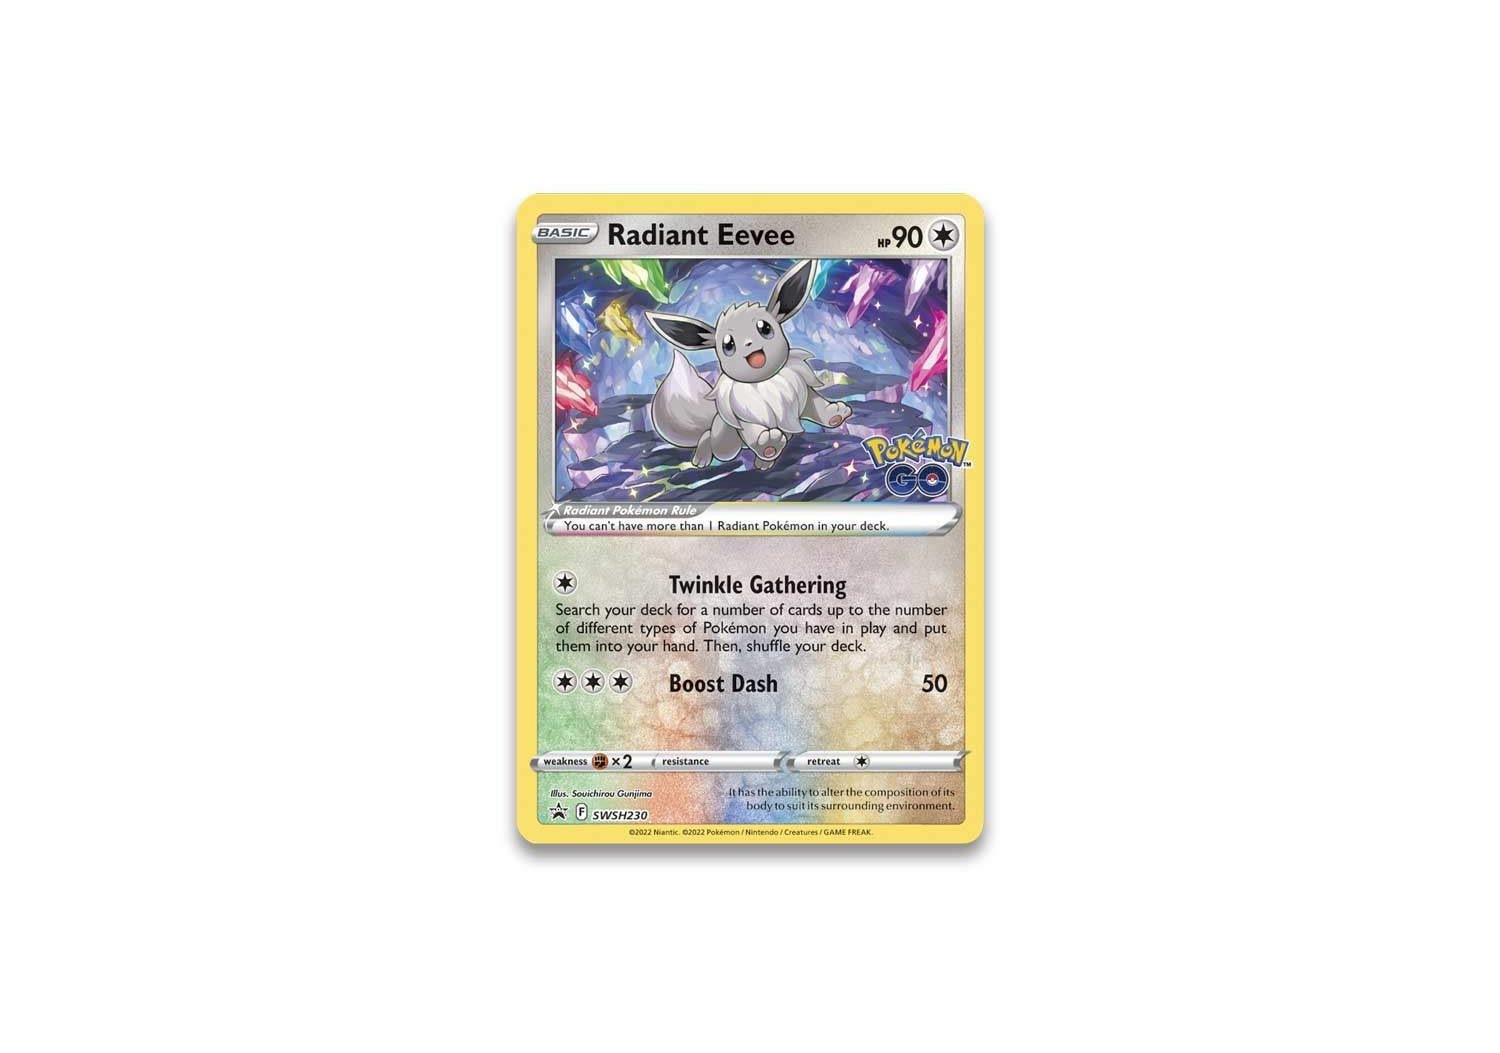 Radiant Eevee is a great card to invest in.